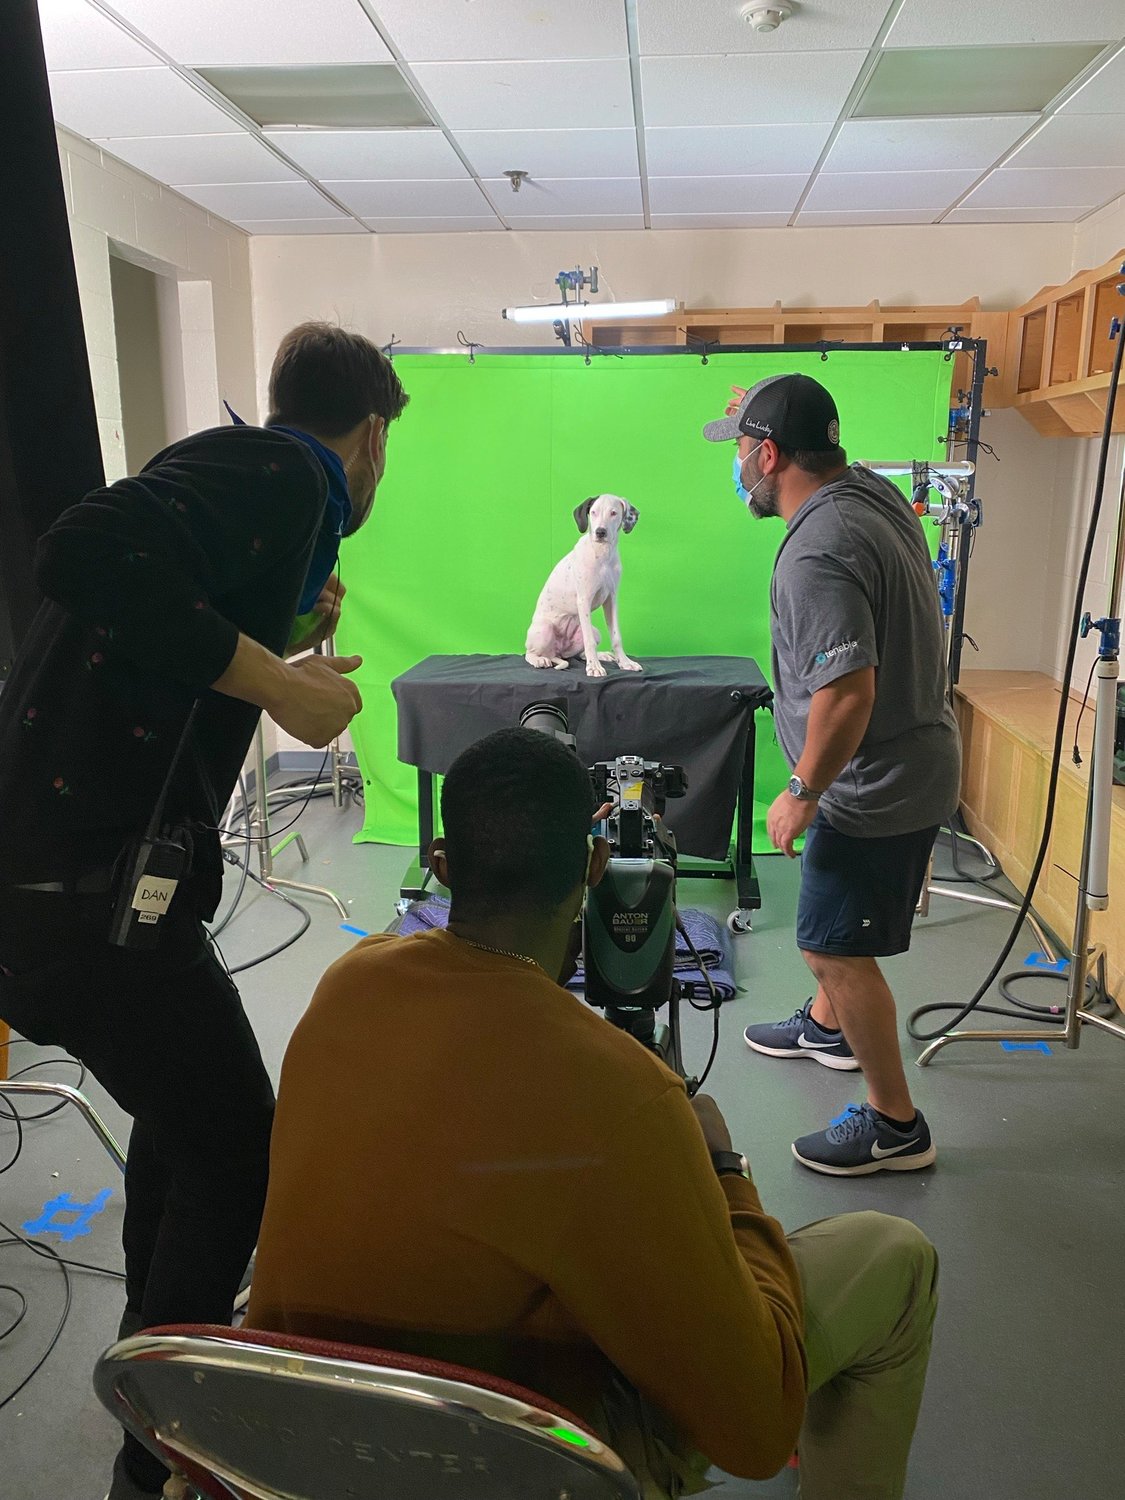 TEAM RUFF — A member of Team Ruff in the upcoming Puppy Bowl XVIII, Dazzle — shown here getting some star treatment on the set represents House of Paws Rescue in Utica.